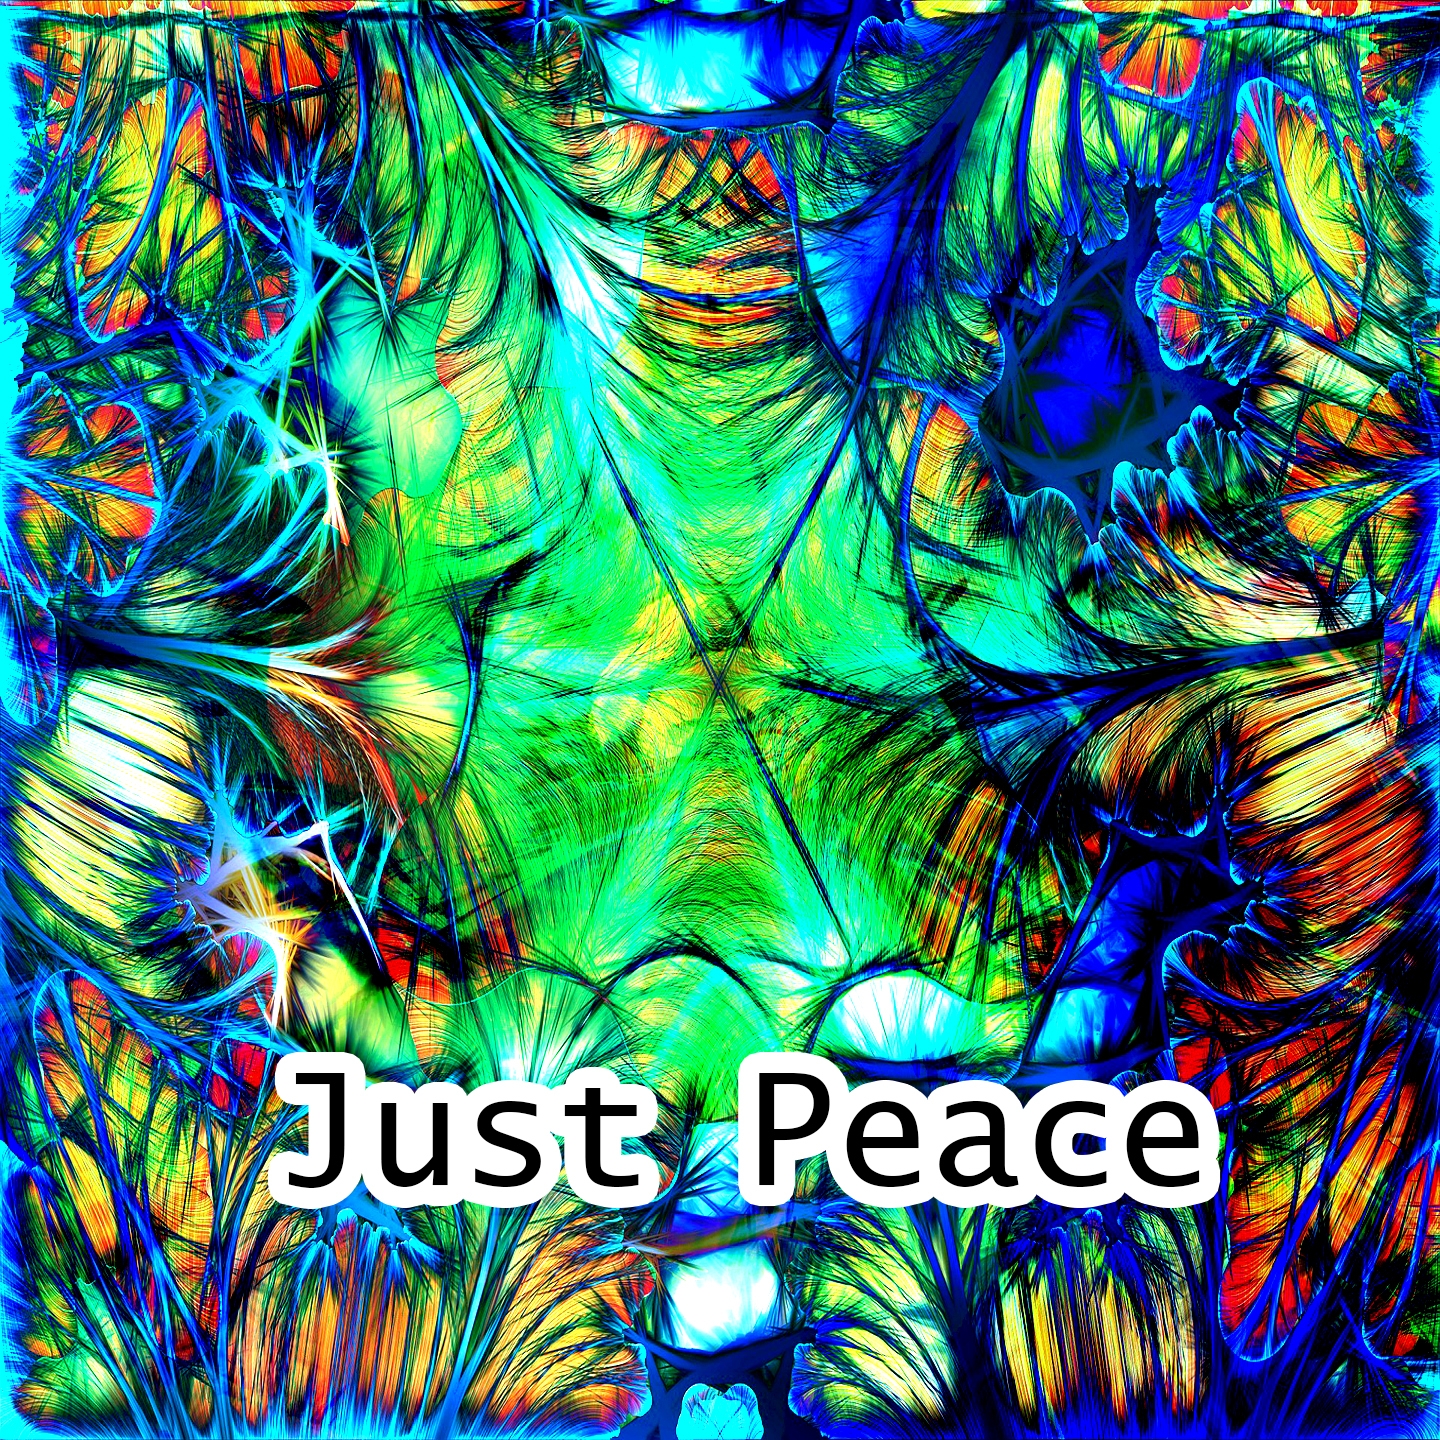 Just Peace